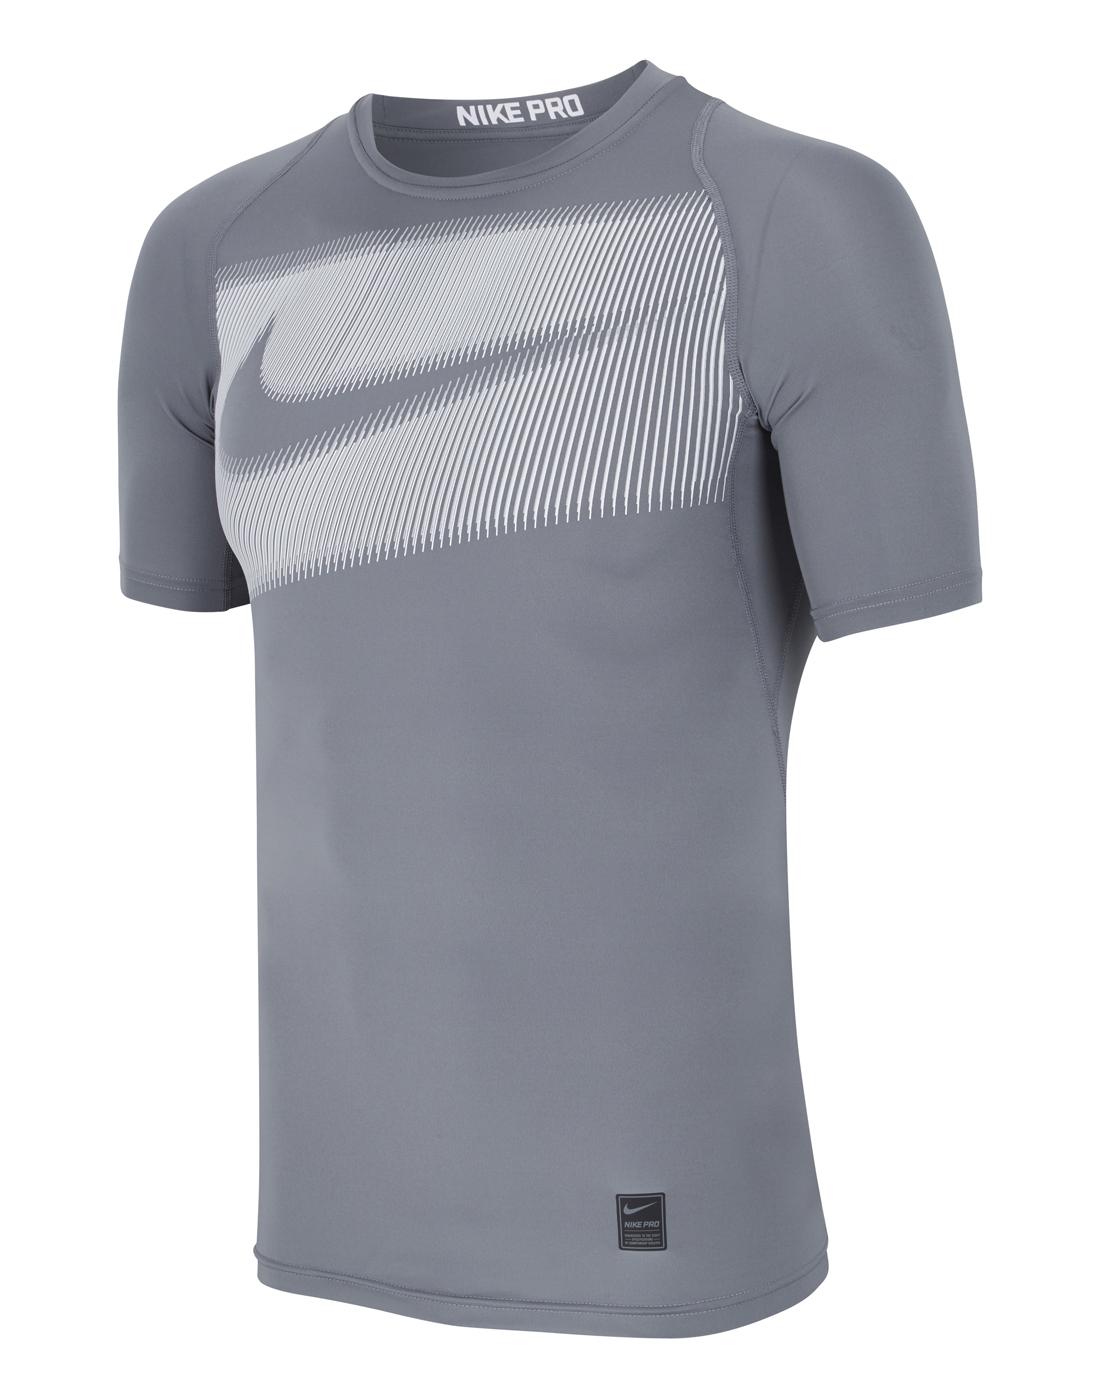 Nike Mens Pro Graphic Fitted Tee - Grey | Life Style Sports UK